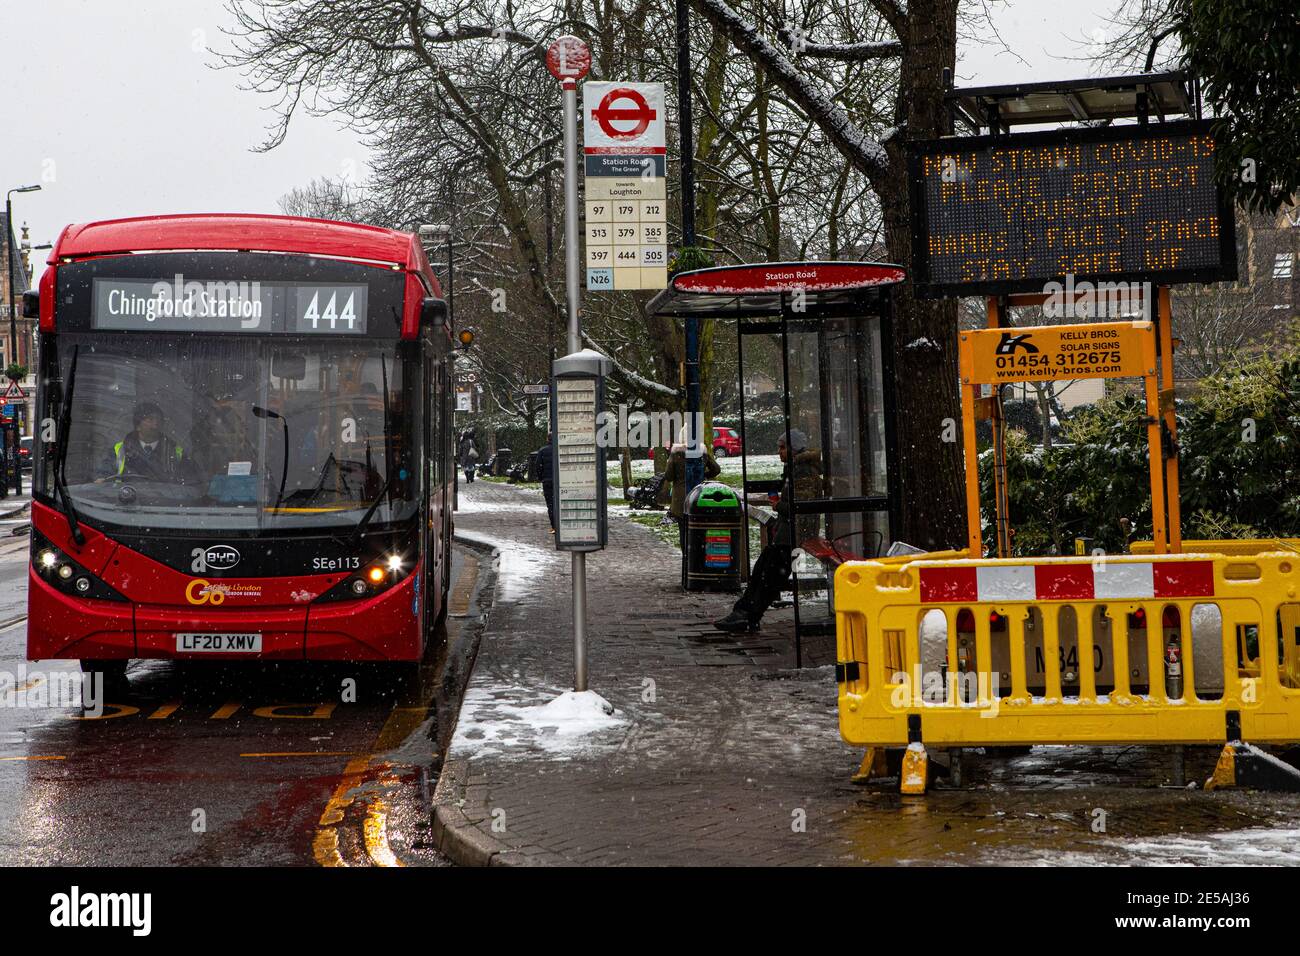 London, UK - January 24th 2021: A public information sign on Station Road in Chingford, London, reminding people about the new strain of Covid-19 and Stock Photo